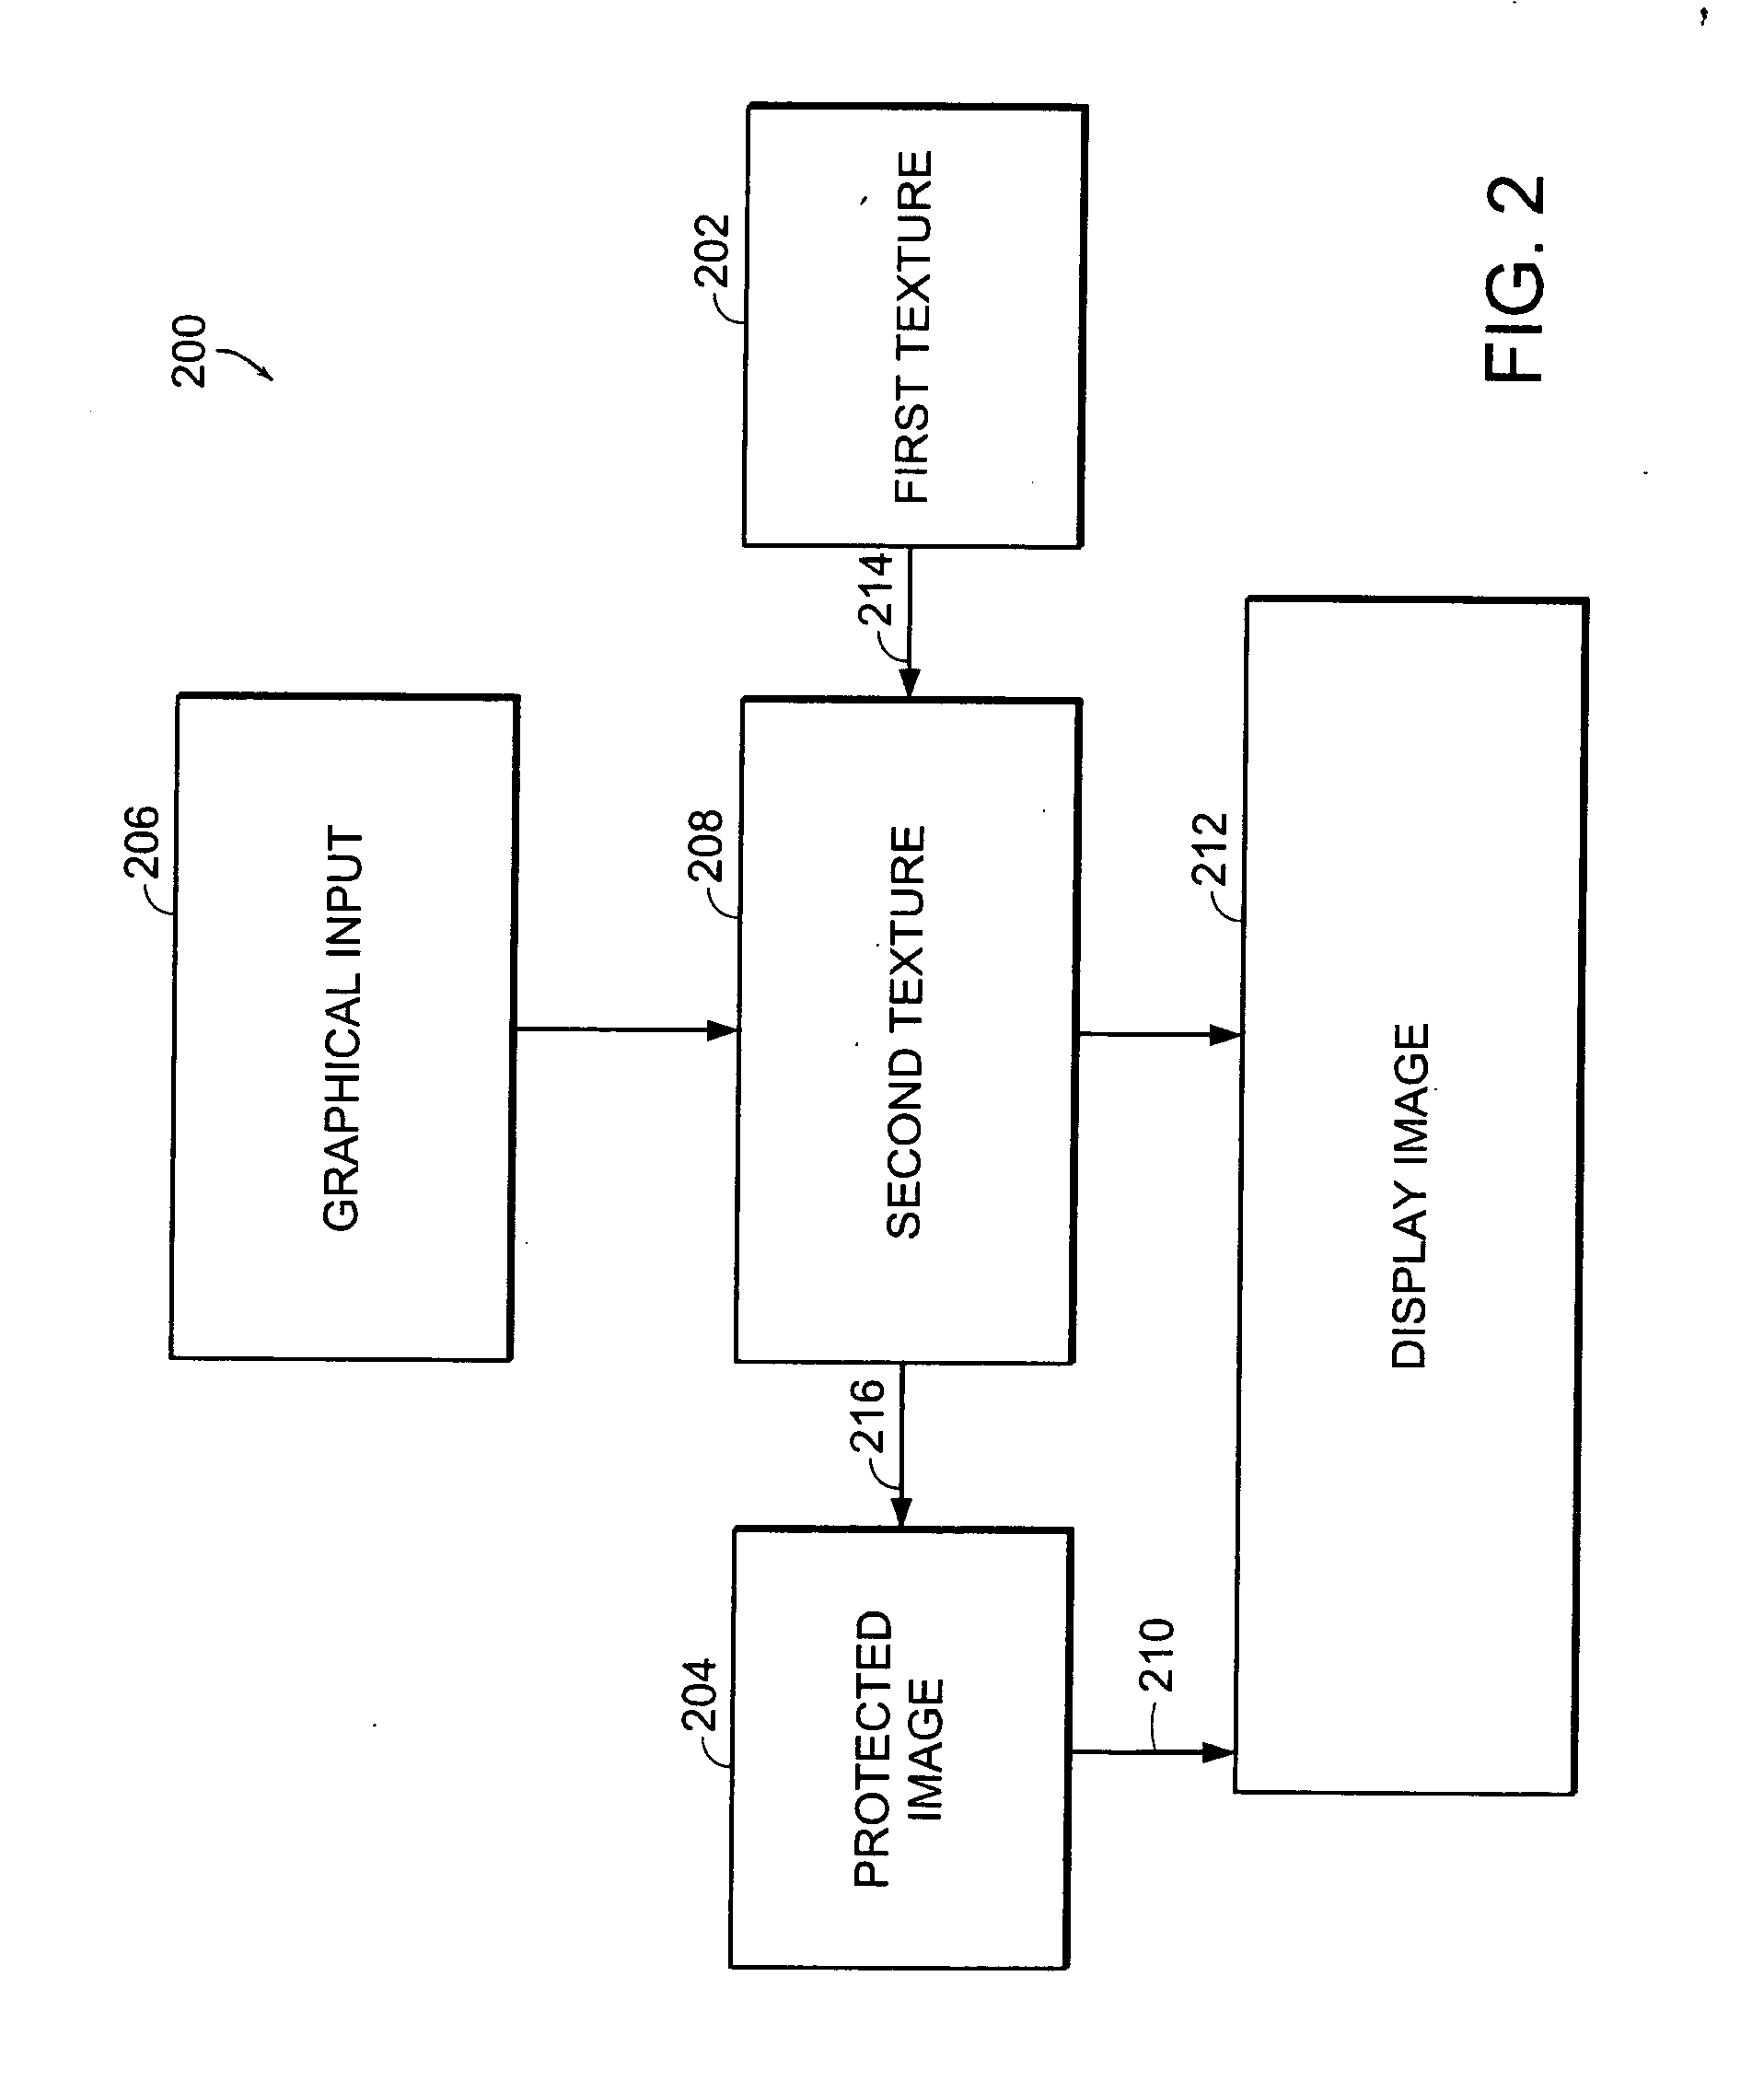 Apparatus and methods for stenciling an image